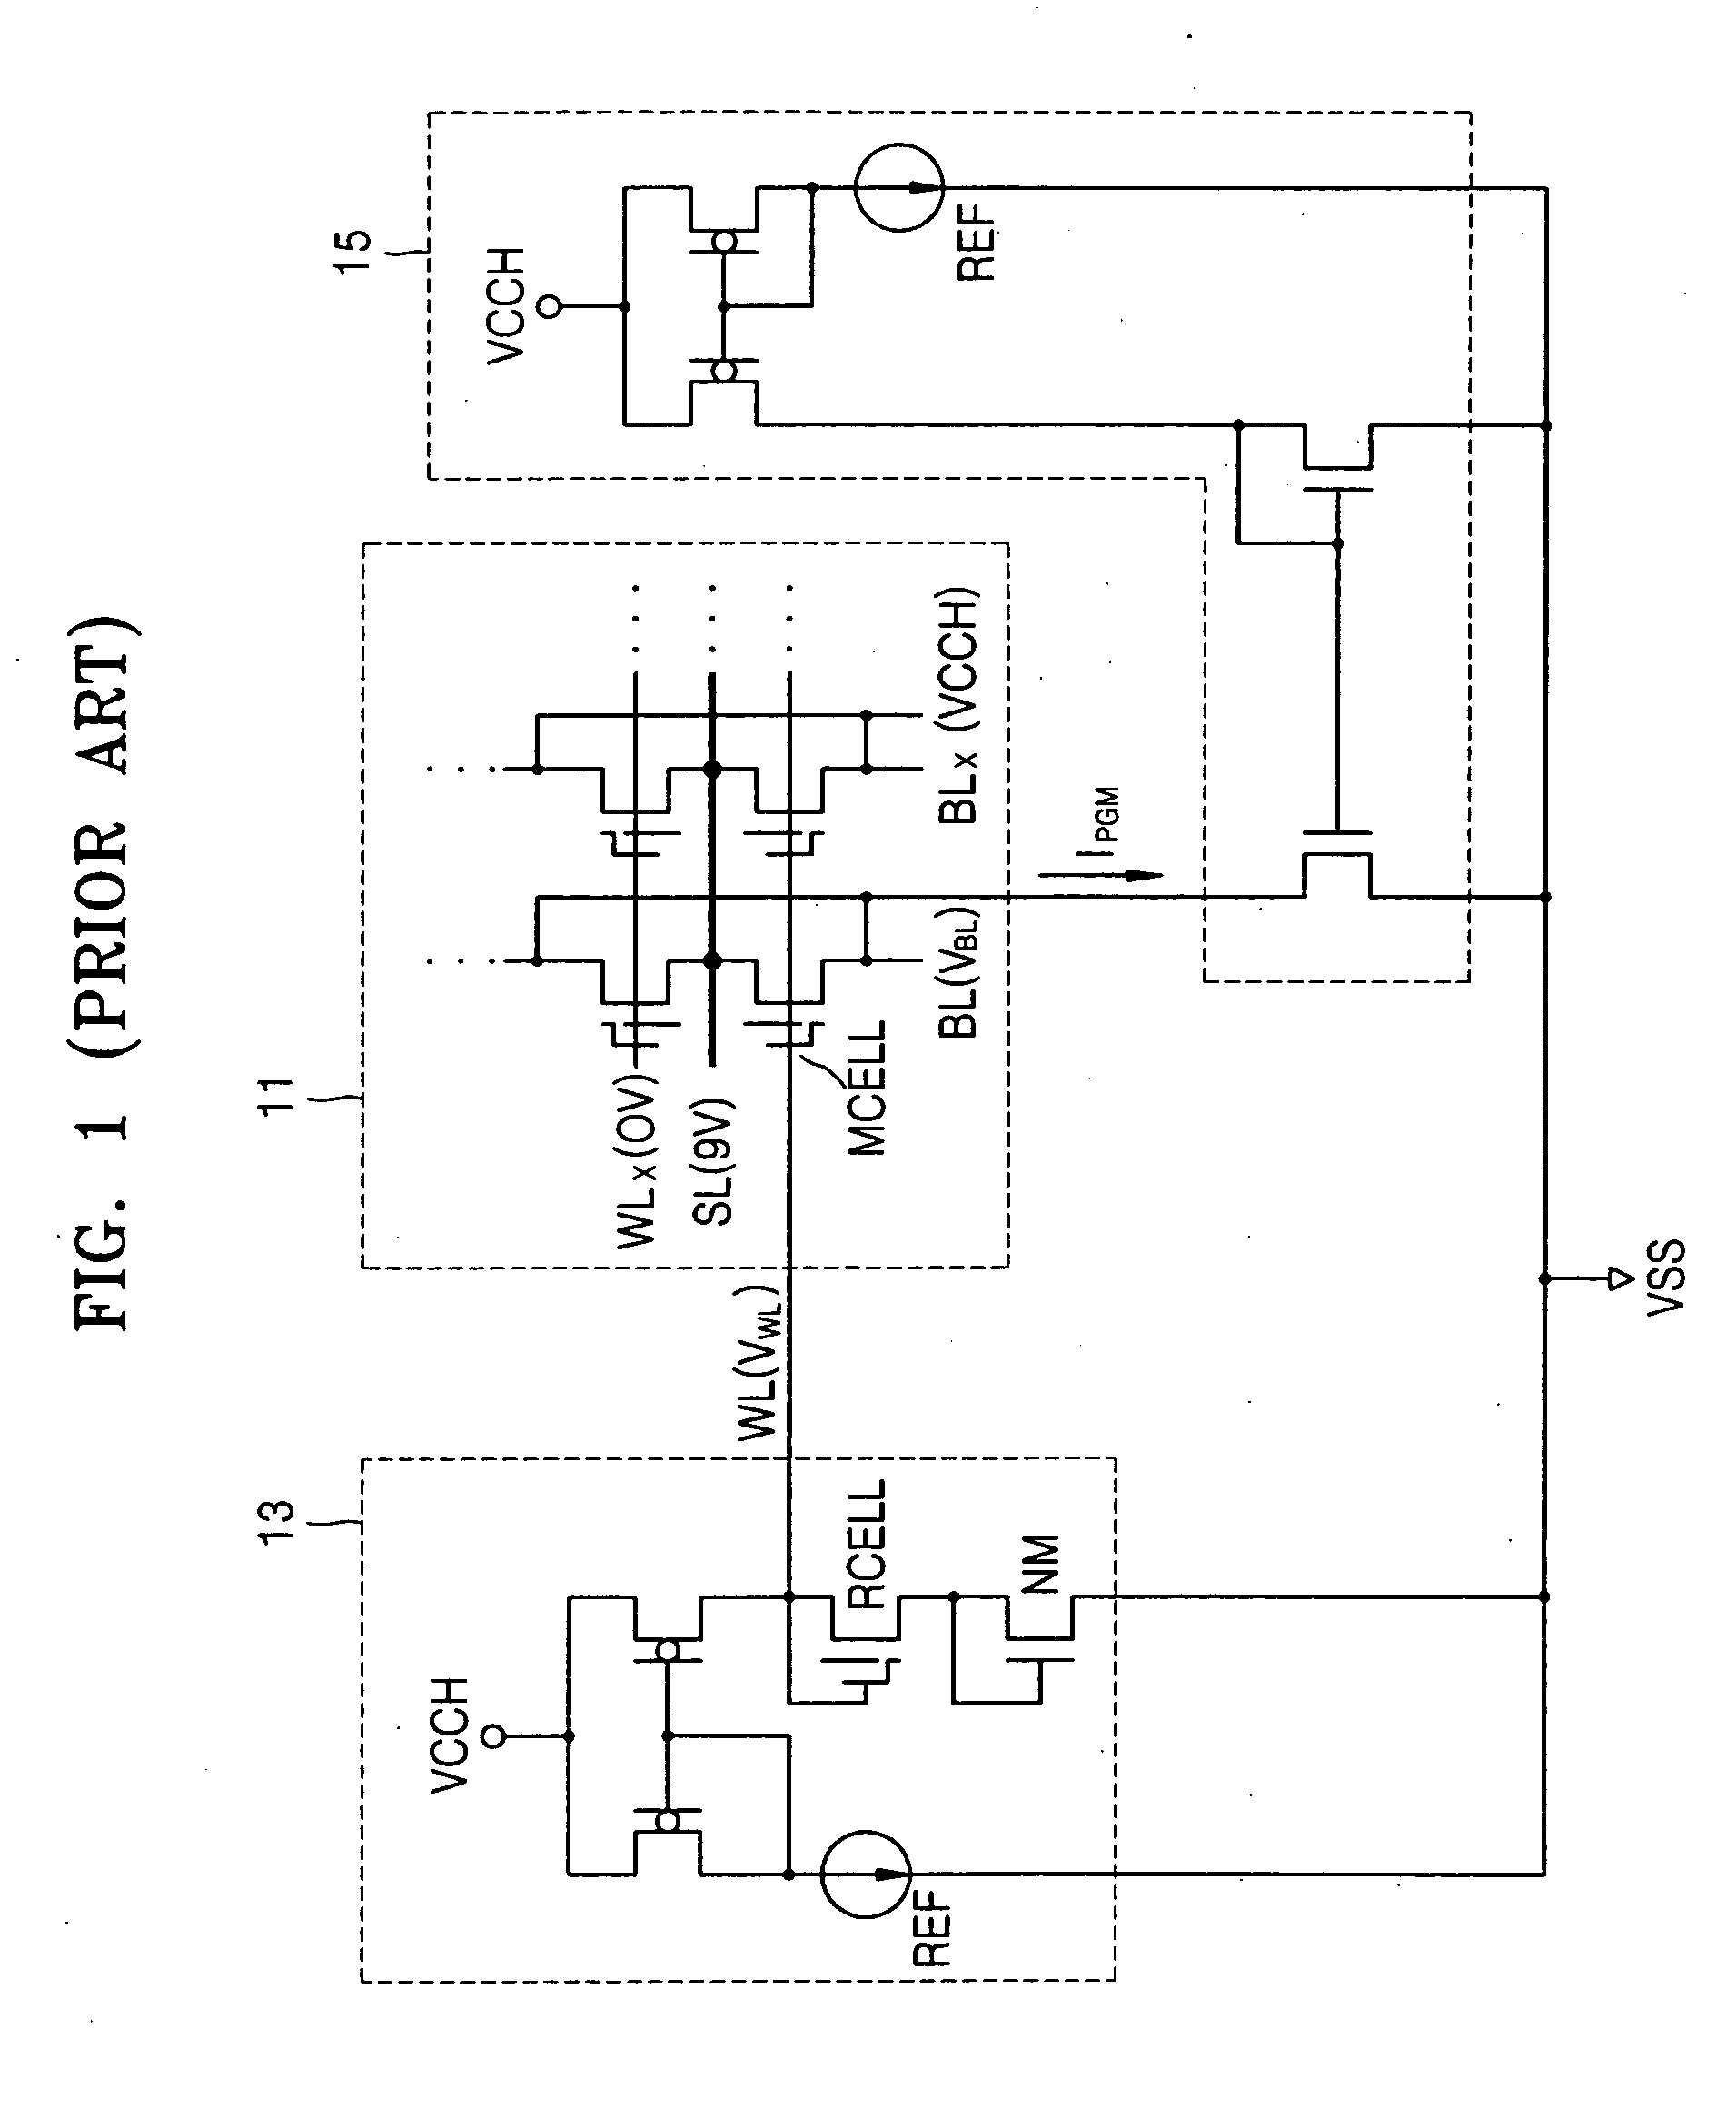 Flash memory device including bit line voltage clamp circuit for controlling bit line voltage during programming, and bit line voltage control method thereof